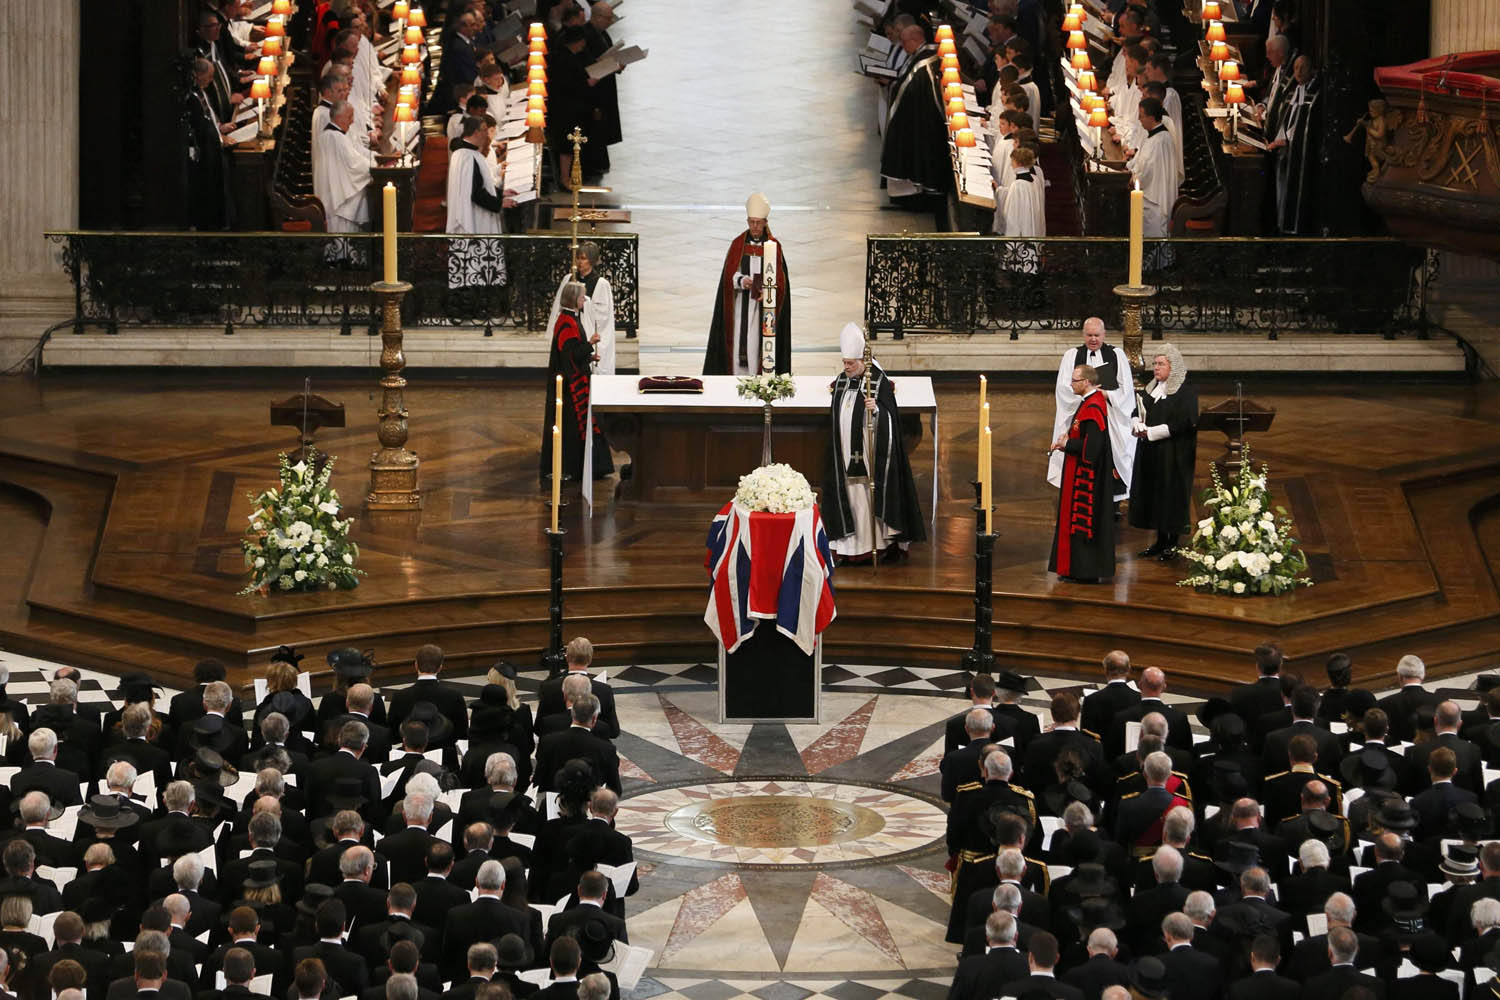 The Archbishop of London, Richard Chartres walks behind the coffin of former British prime minister Margaret Thatcher during her funeral service at Saint Paul's Cathedral in London